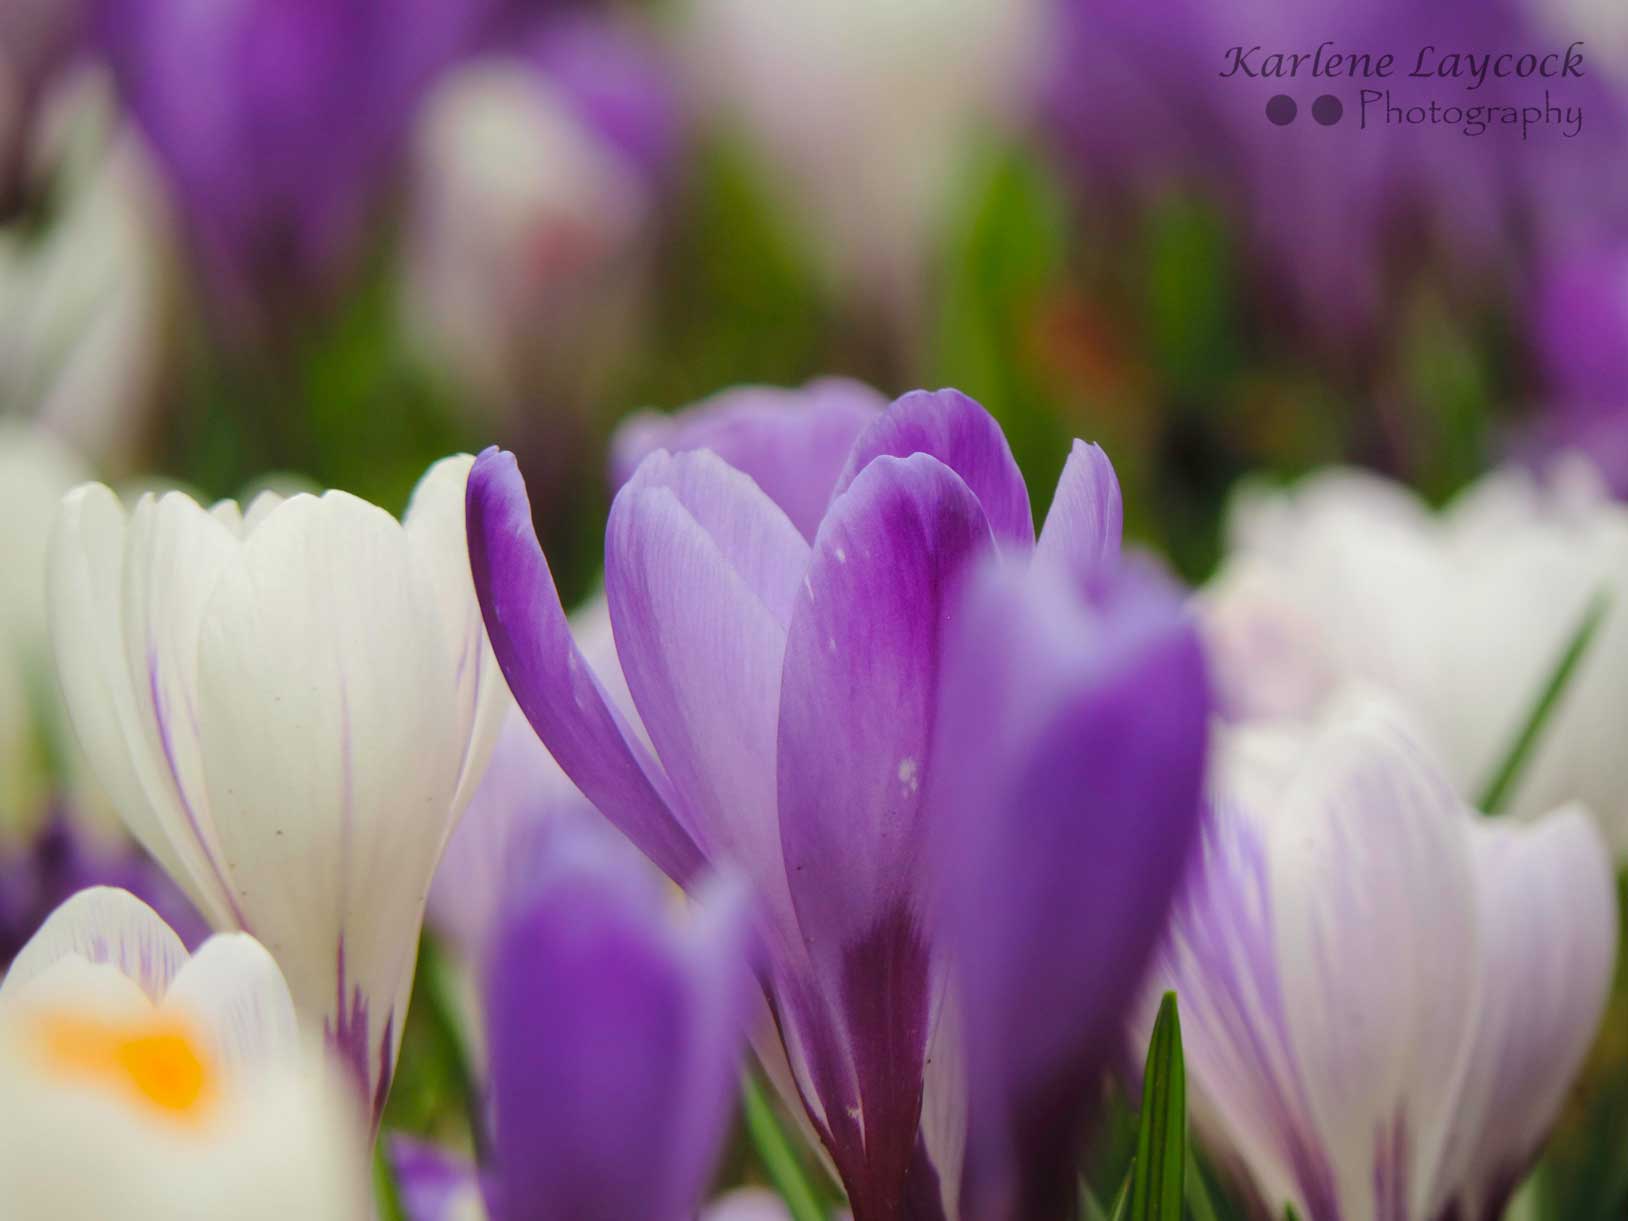 Photograph of Purple and White Crocuses – Gatley in Bloom